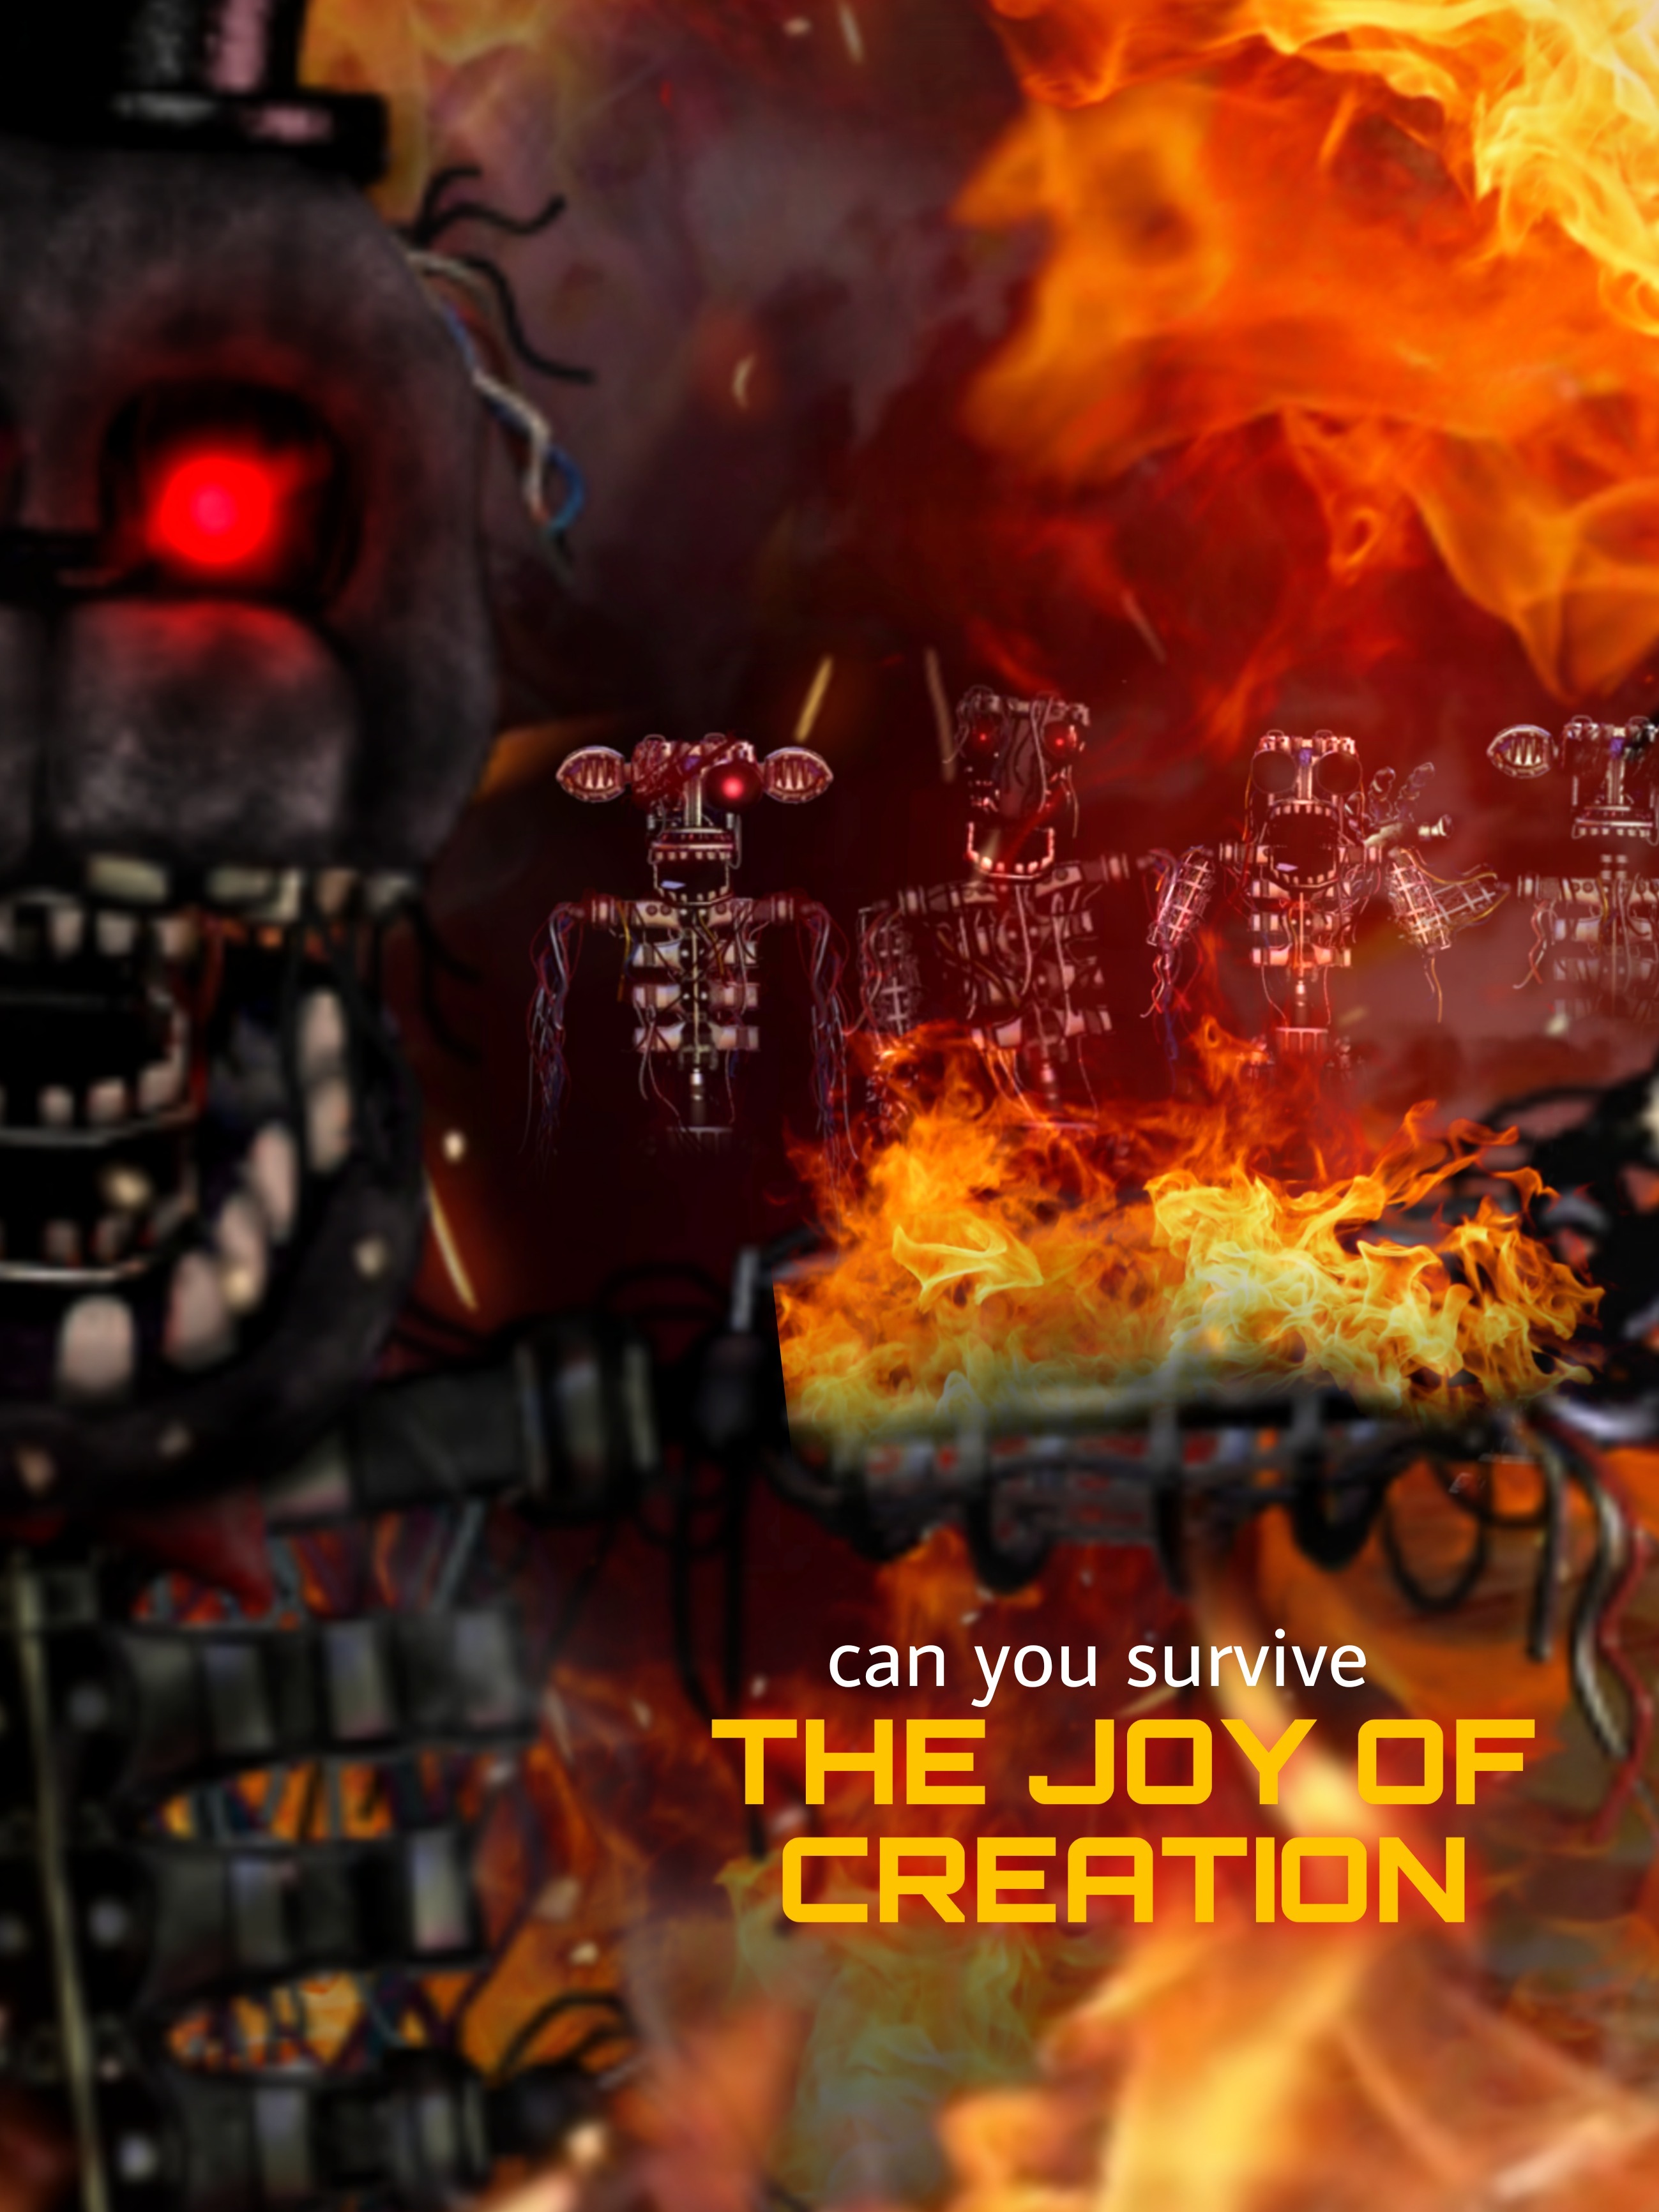 The joy of creation posters remake (Foxy) by Bugmaser on DeviantArt